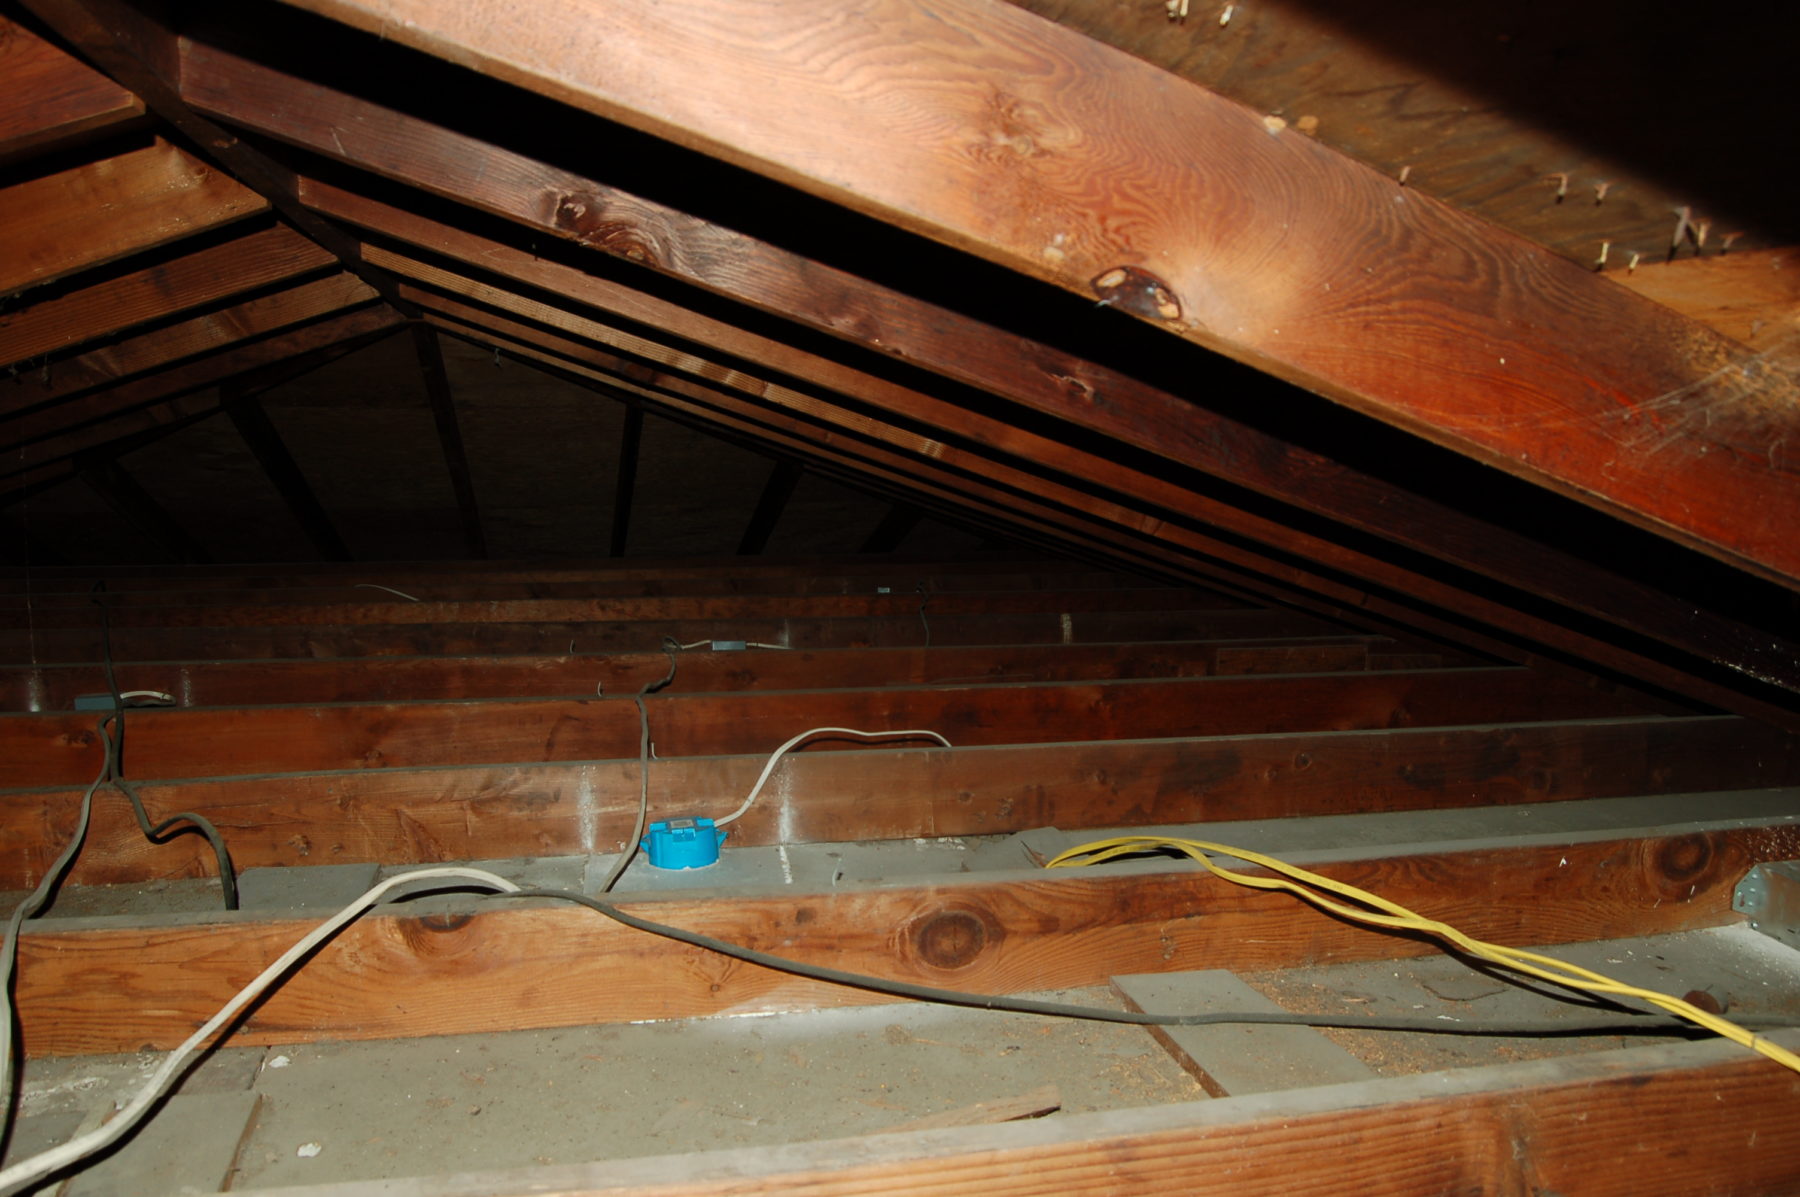 This is an attic without insulation